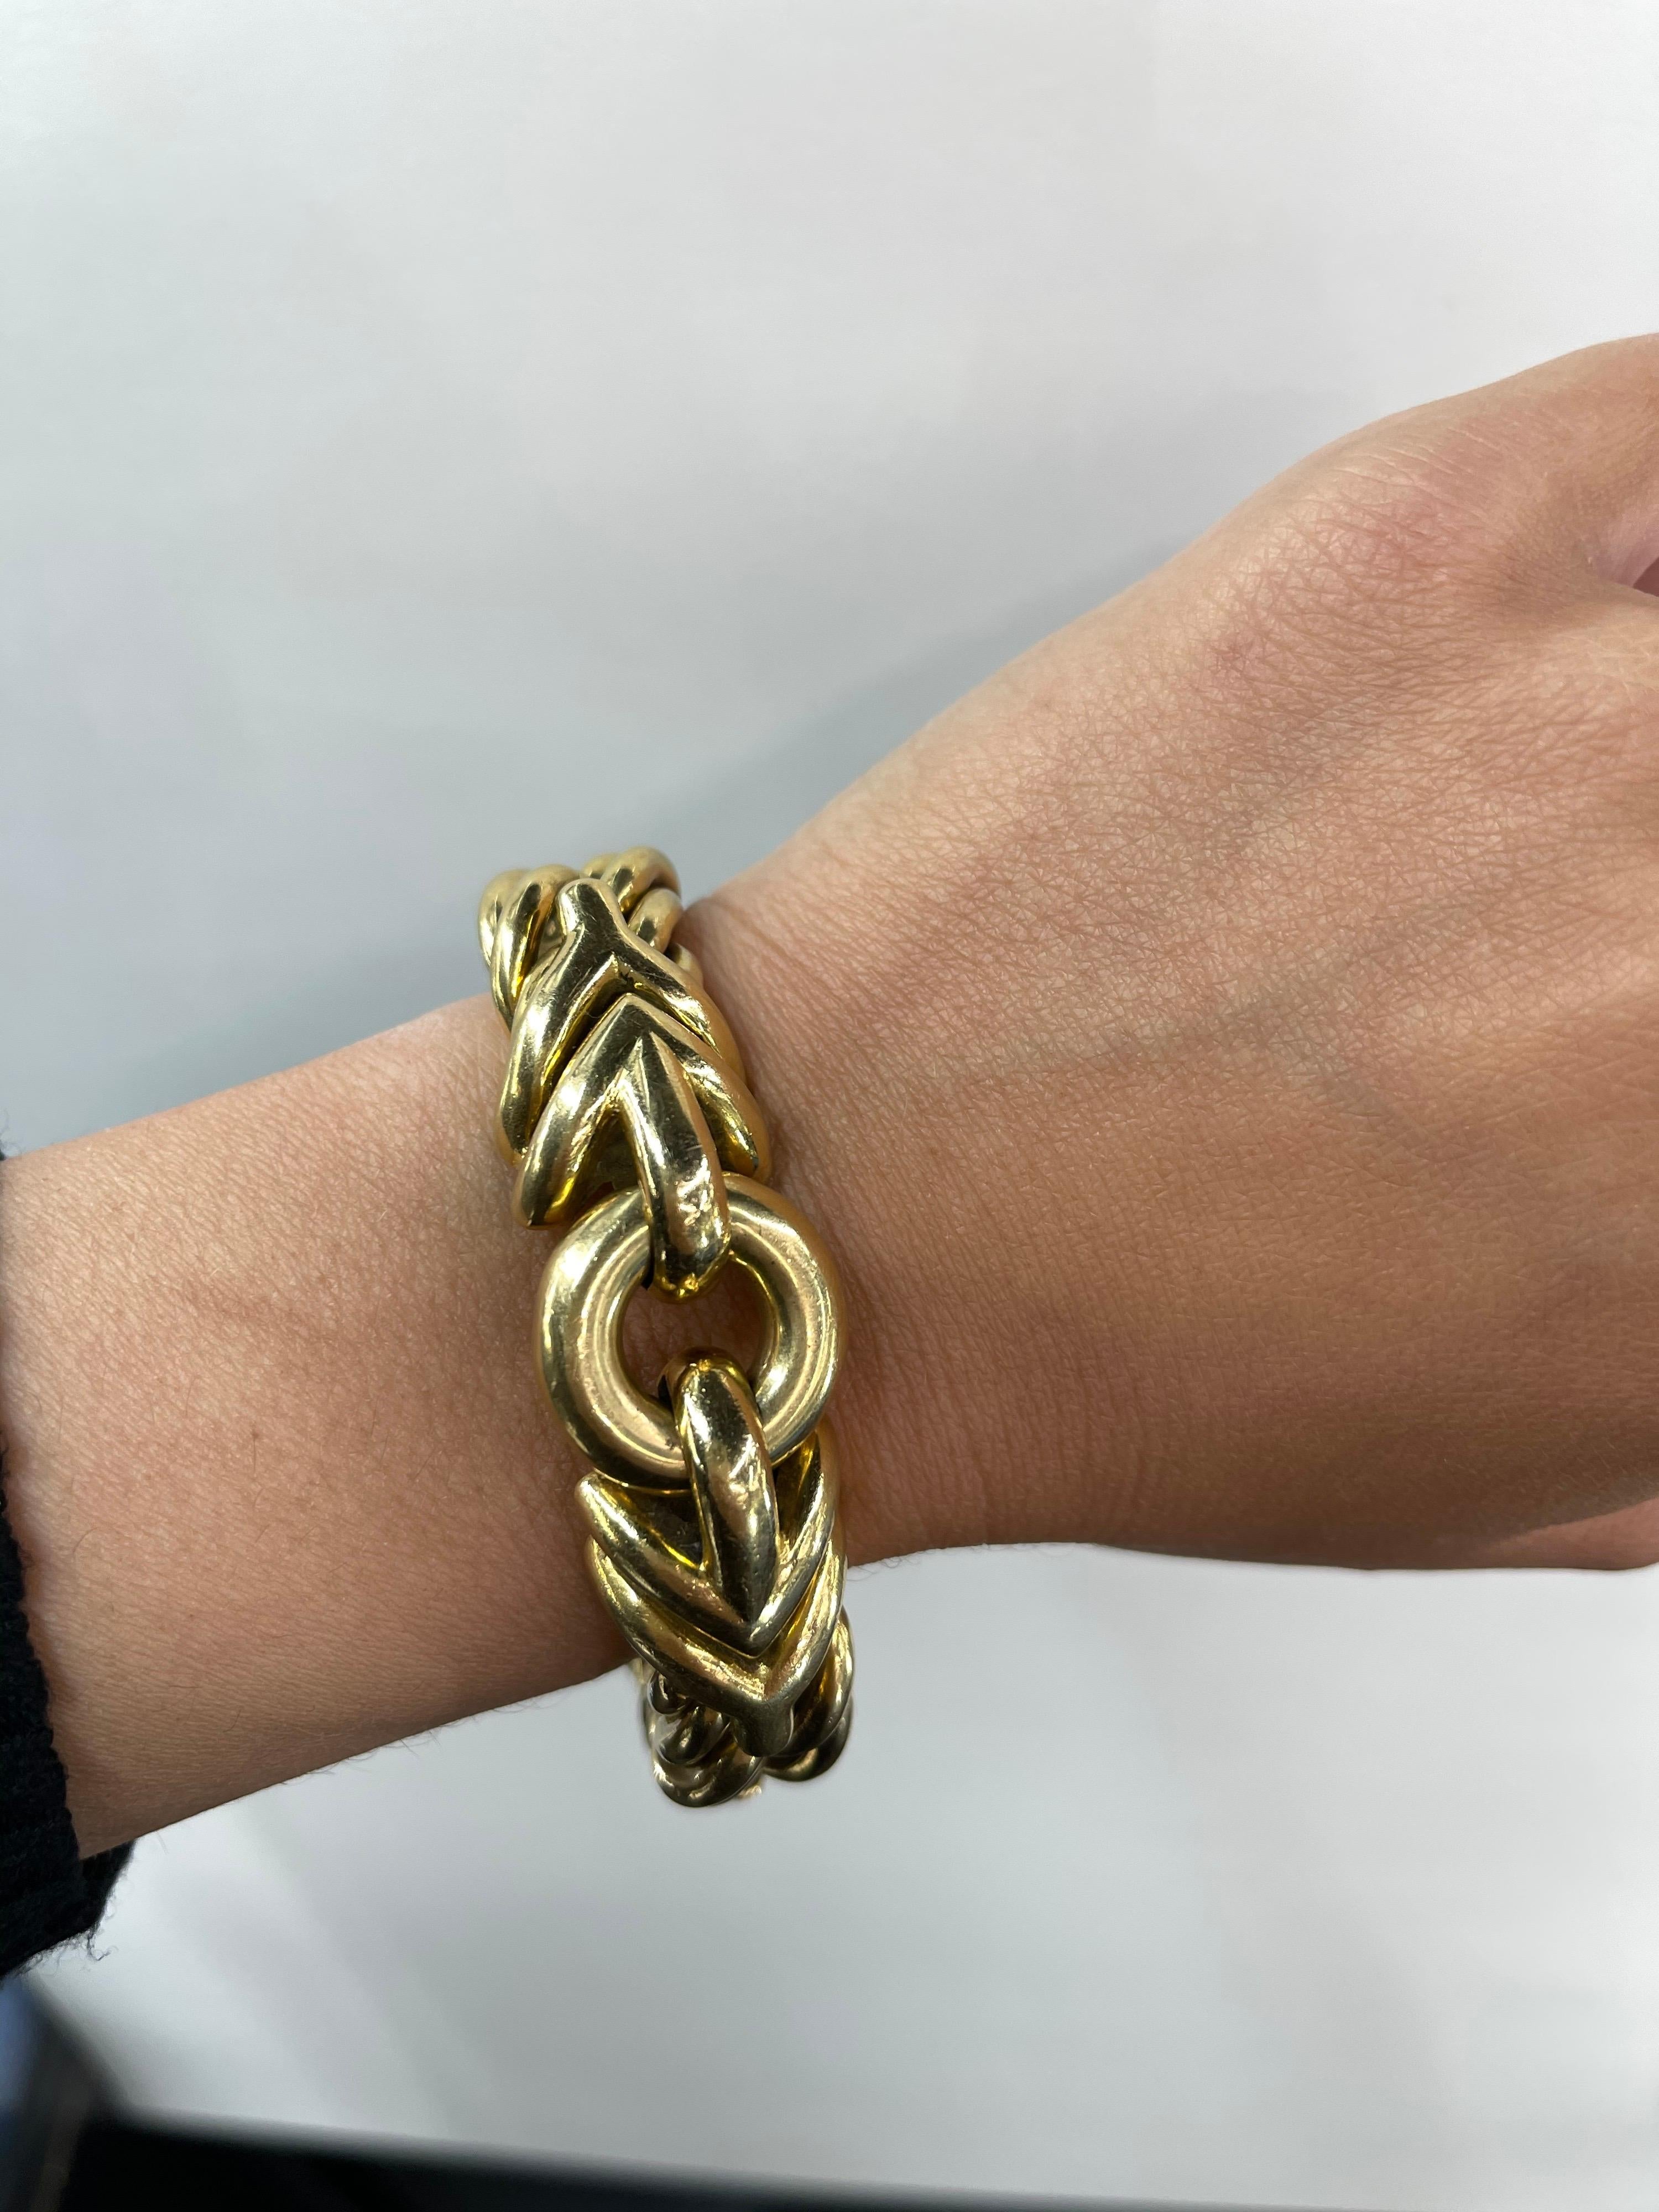 Dorfman 18 Karat Yellow Gold Link Bracelet 78.6 Grams Made in Italy In Excellent Condition For Sale In New York, NY